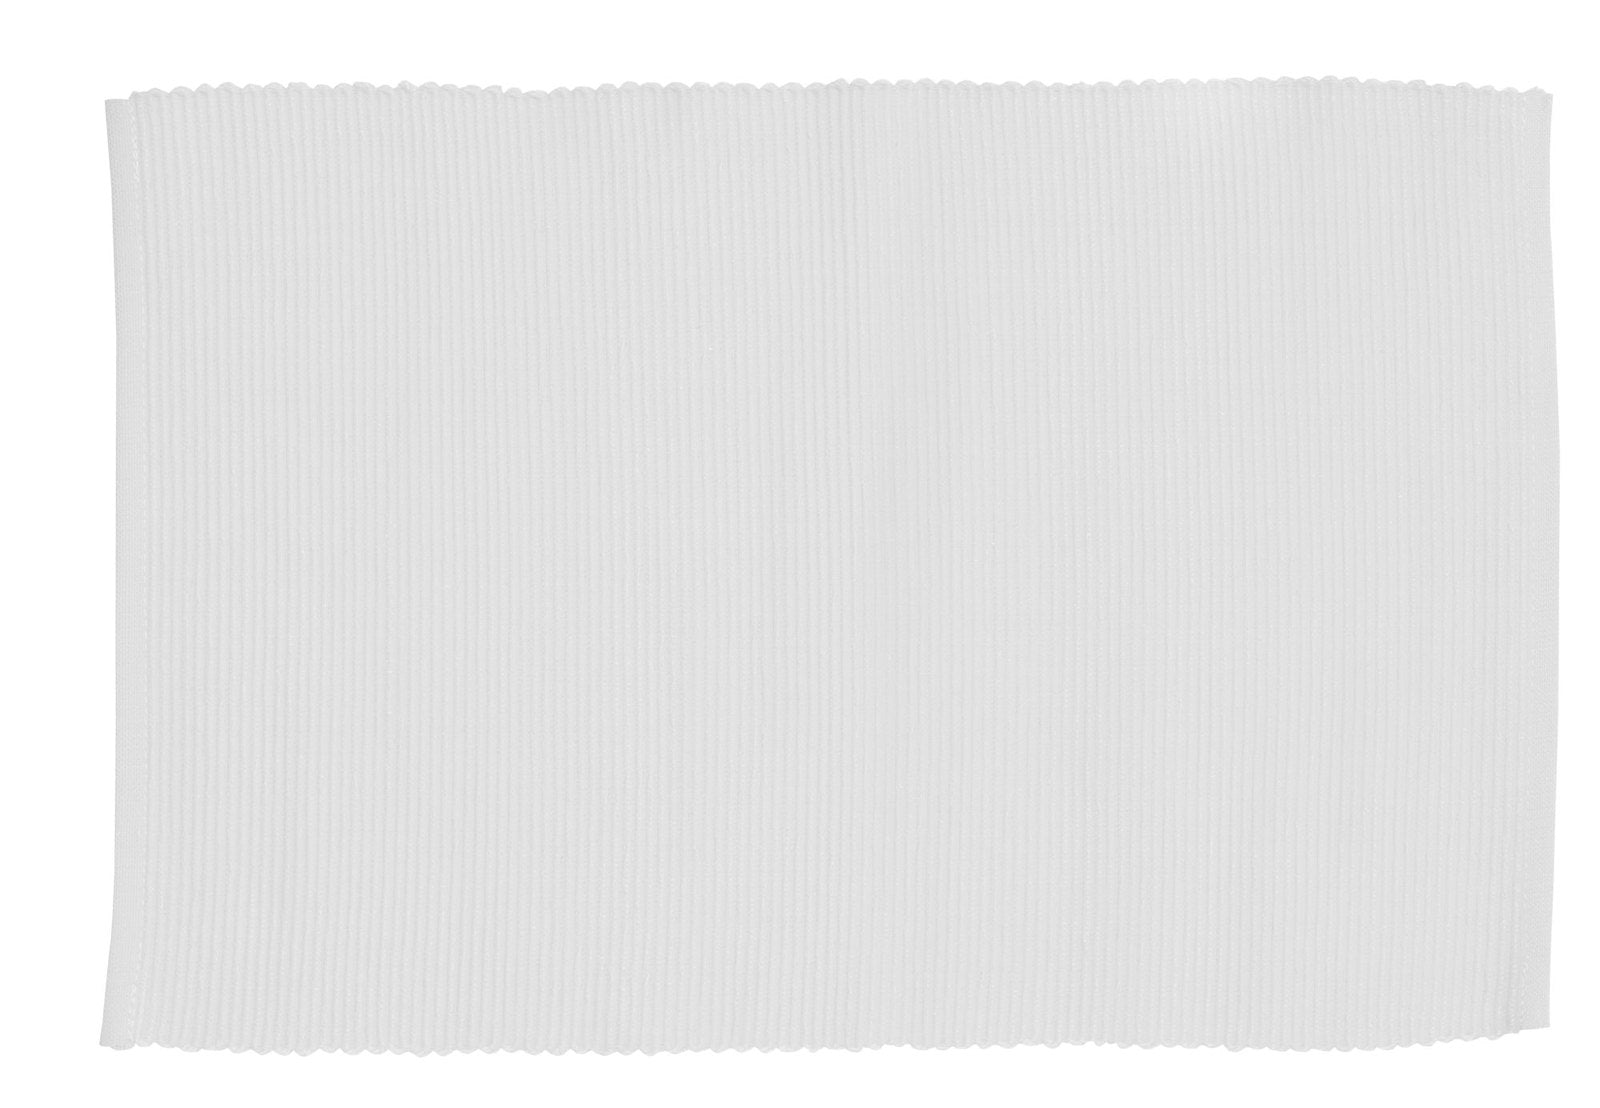 Lollipop Ribbed Placemat - 33 cm x 48 cm (set of 6) in White